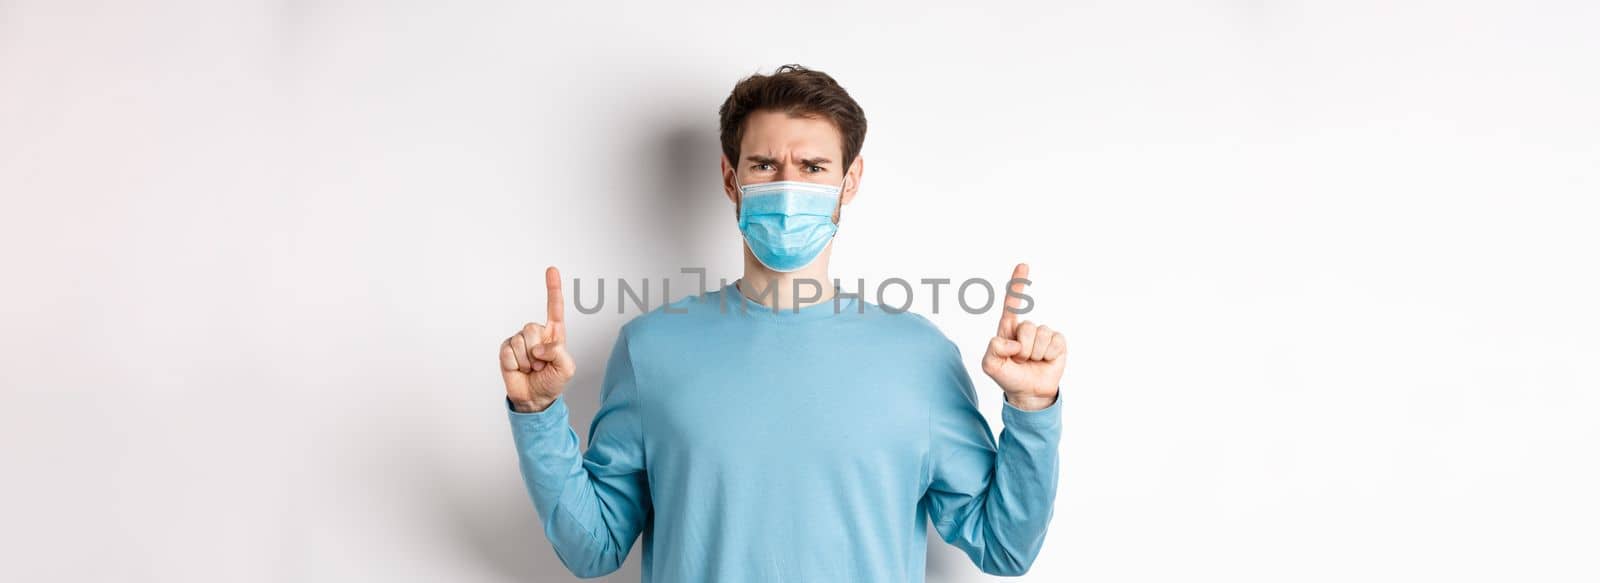 Coronavirus, health and quarantine concept. Disappointed young man frowning at absurd, pointing fingers up and complaining at bad promo, wearing medical mask, white background.